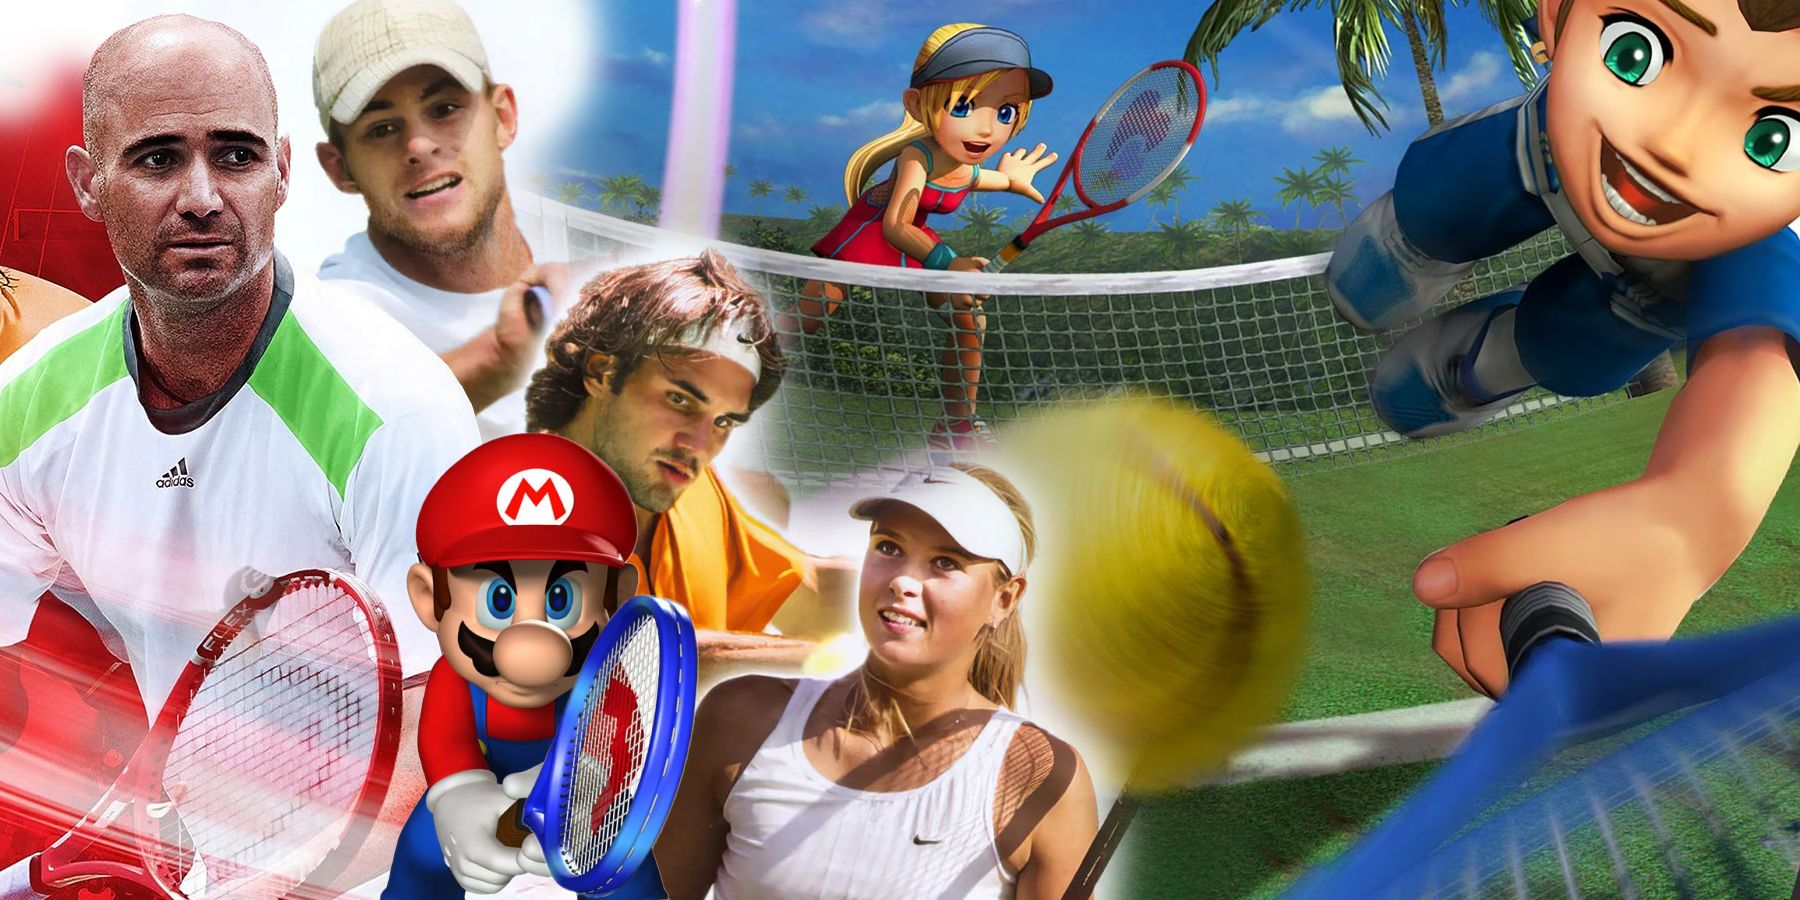 Best Tennis Games Of All Time, Ranked